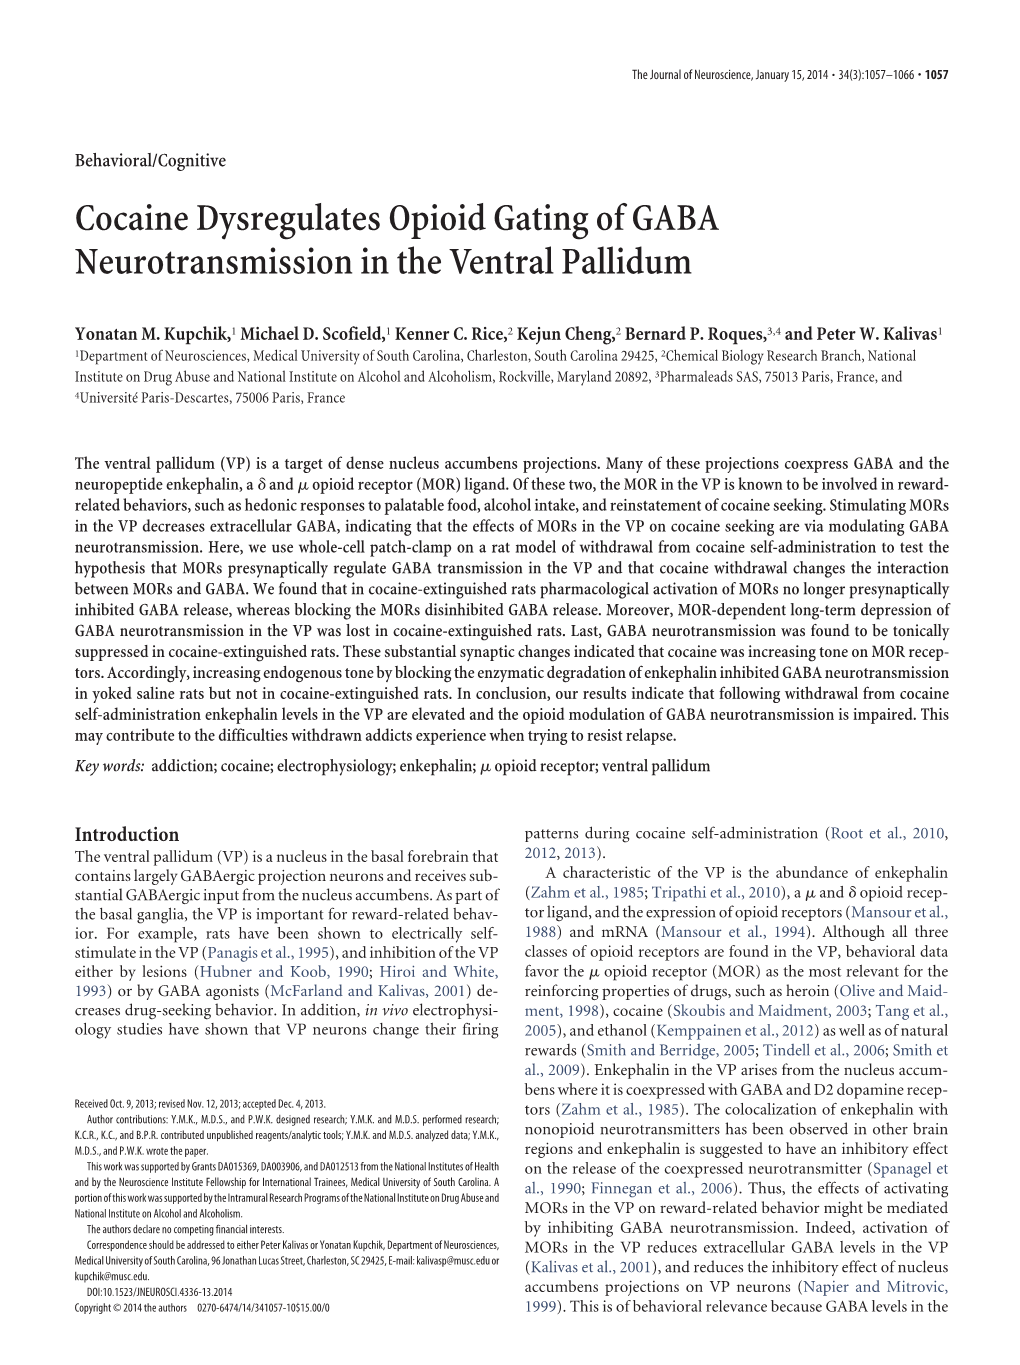 Cocaine Dysregulates Opioid Gating of GABA Neurotransmission in the Ventral Pallidum